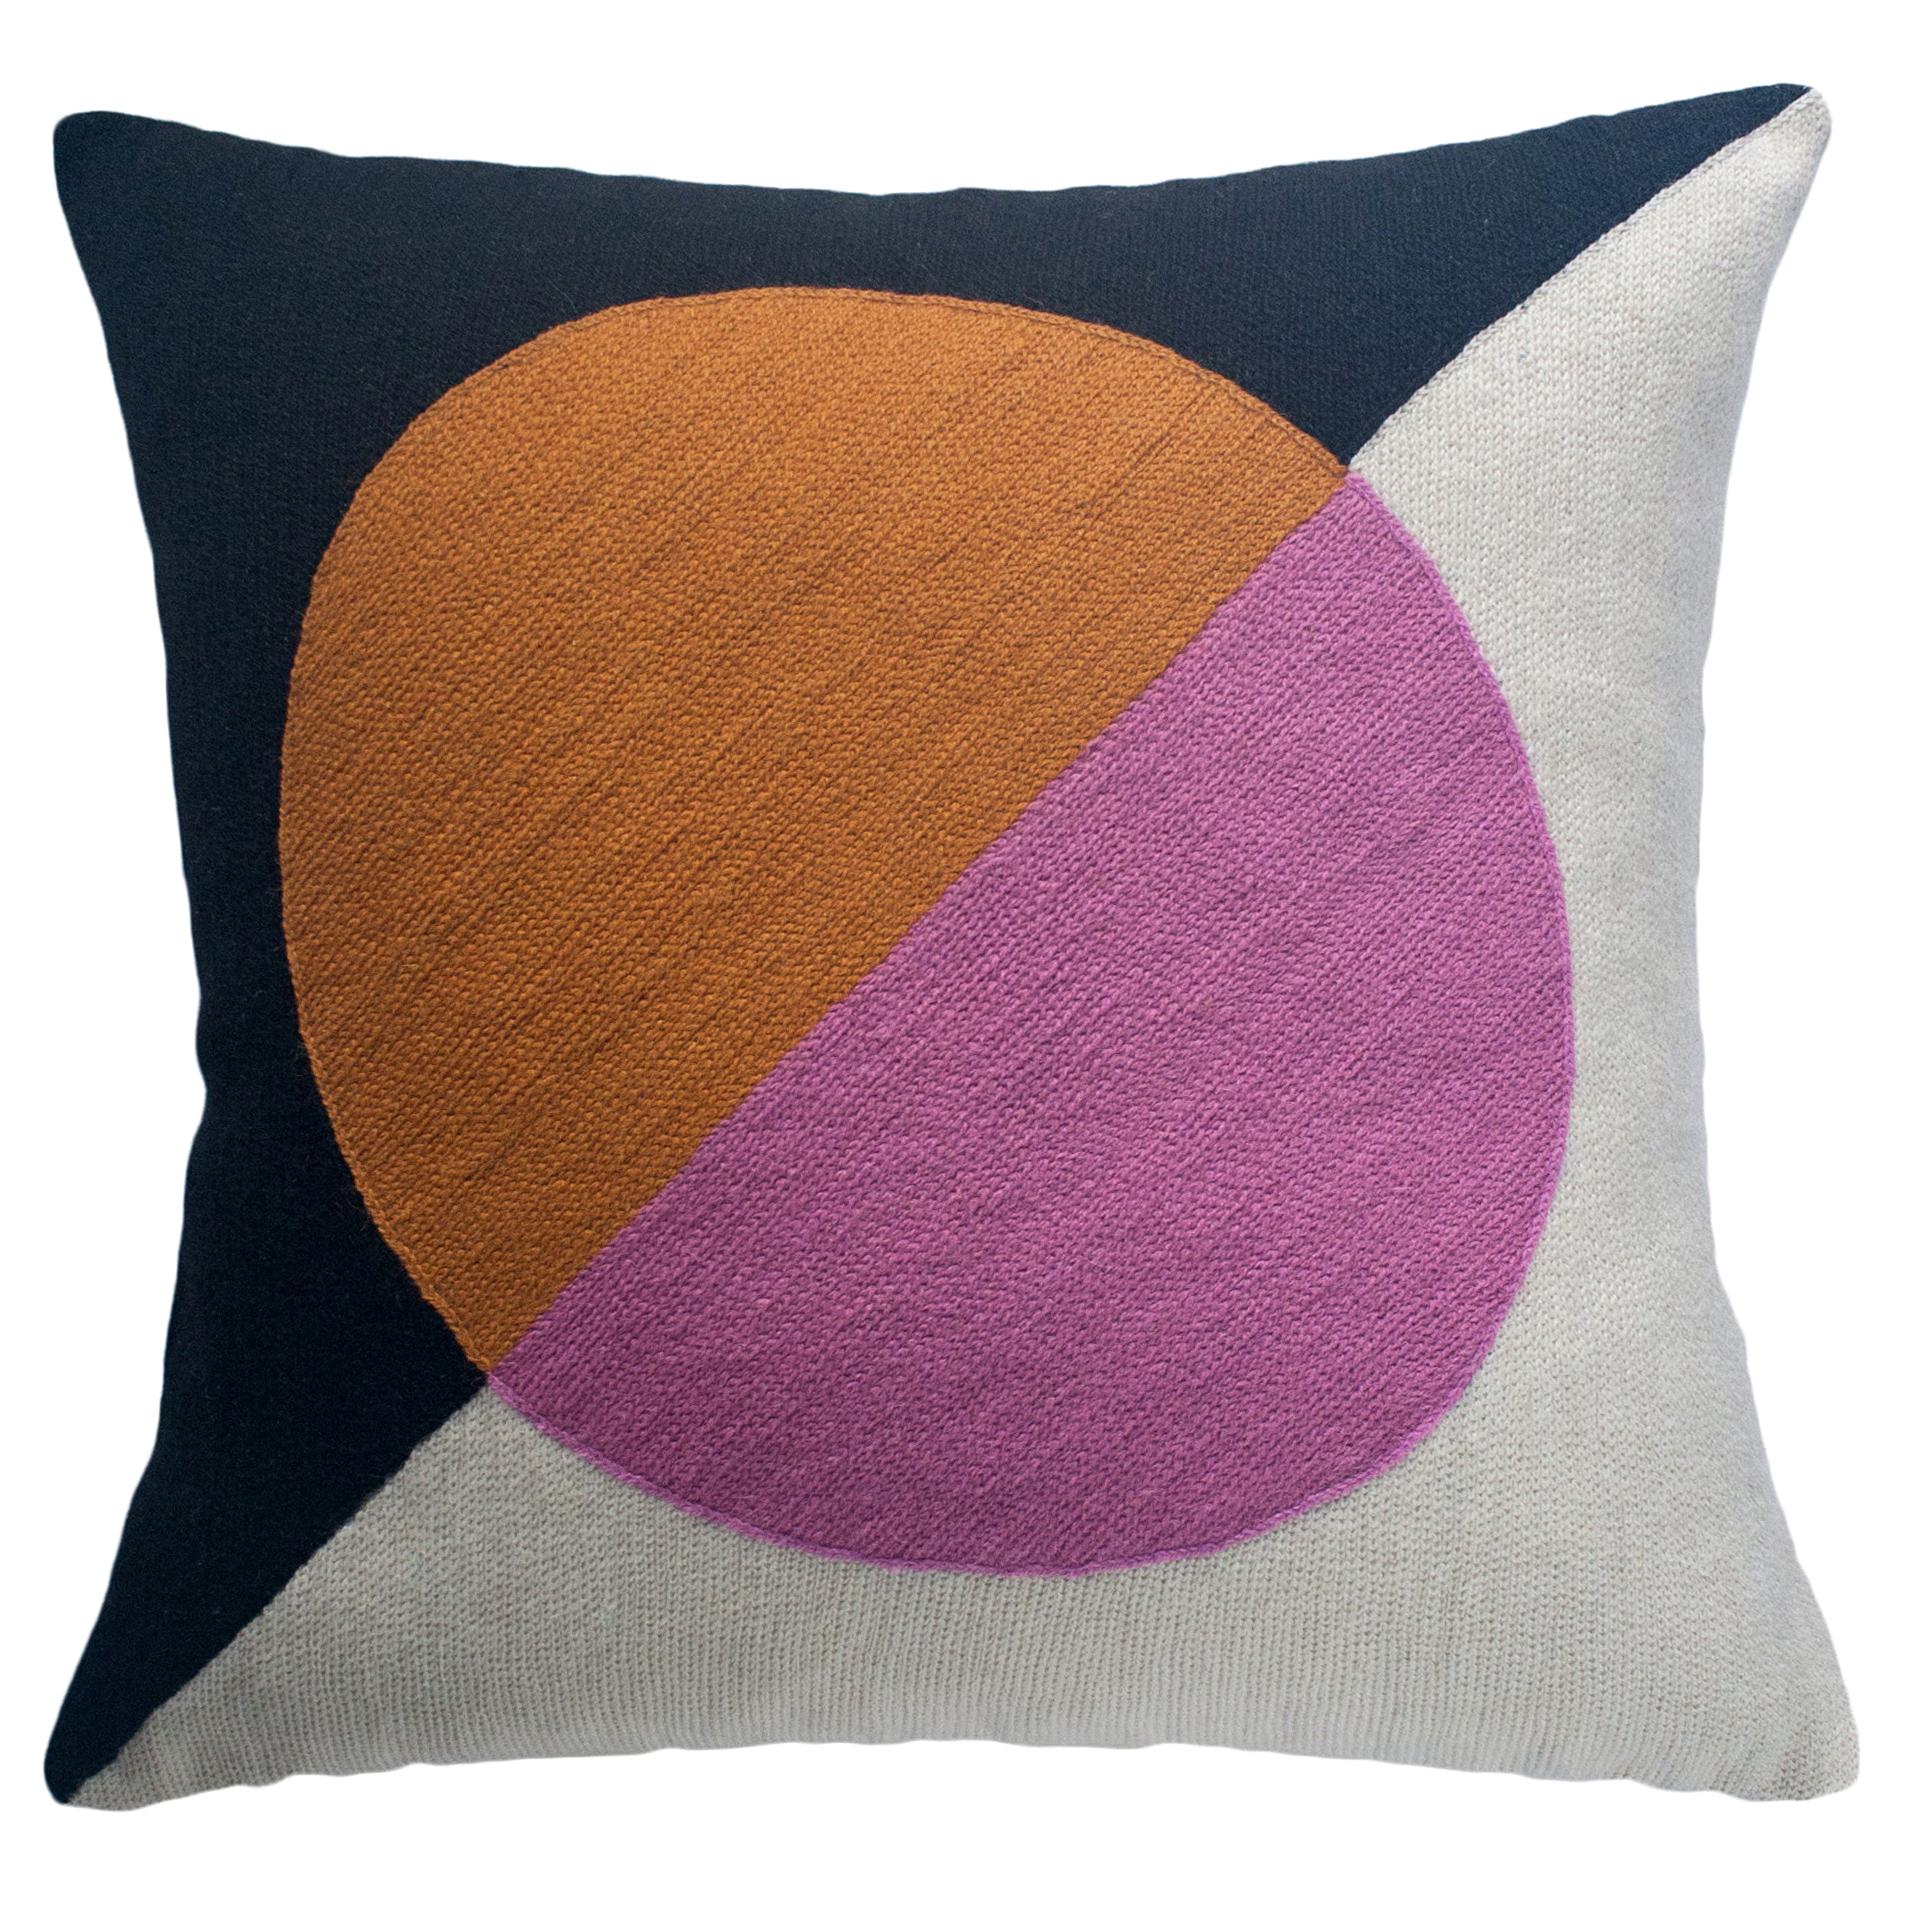 Geometric Madrid Circle Hand Embroidered Modern Throw Pillow Cover